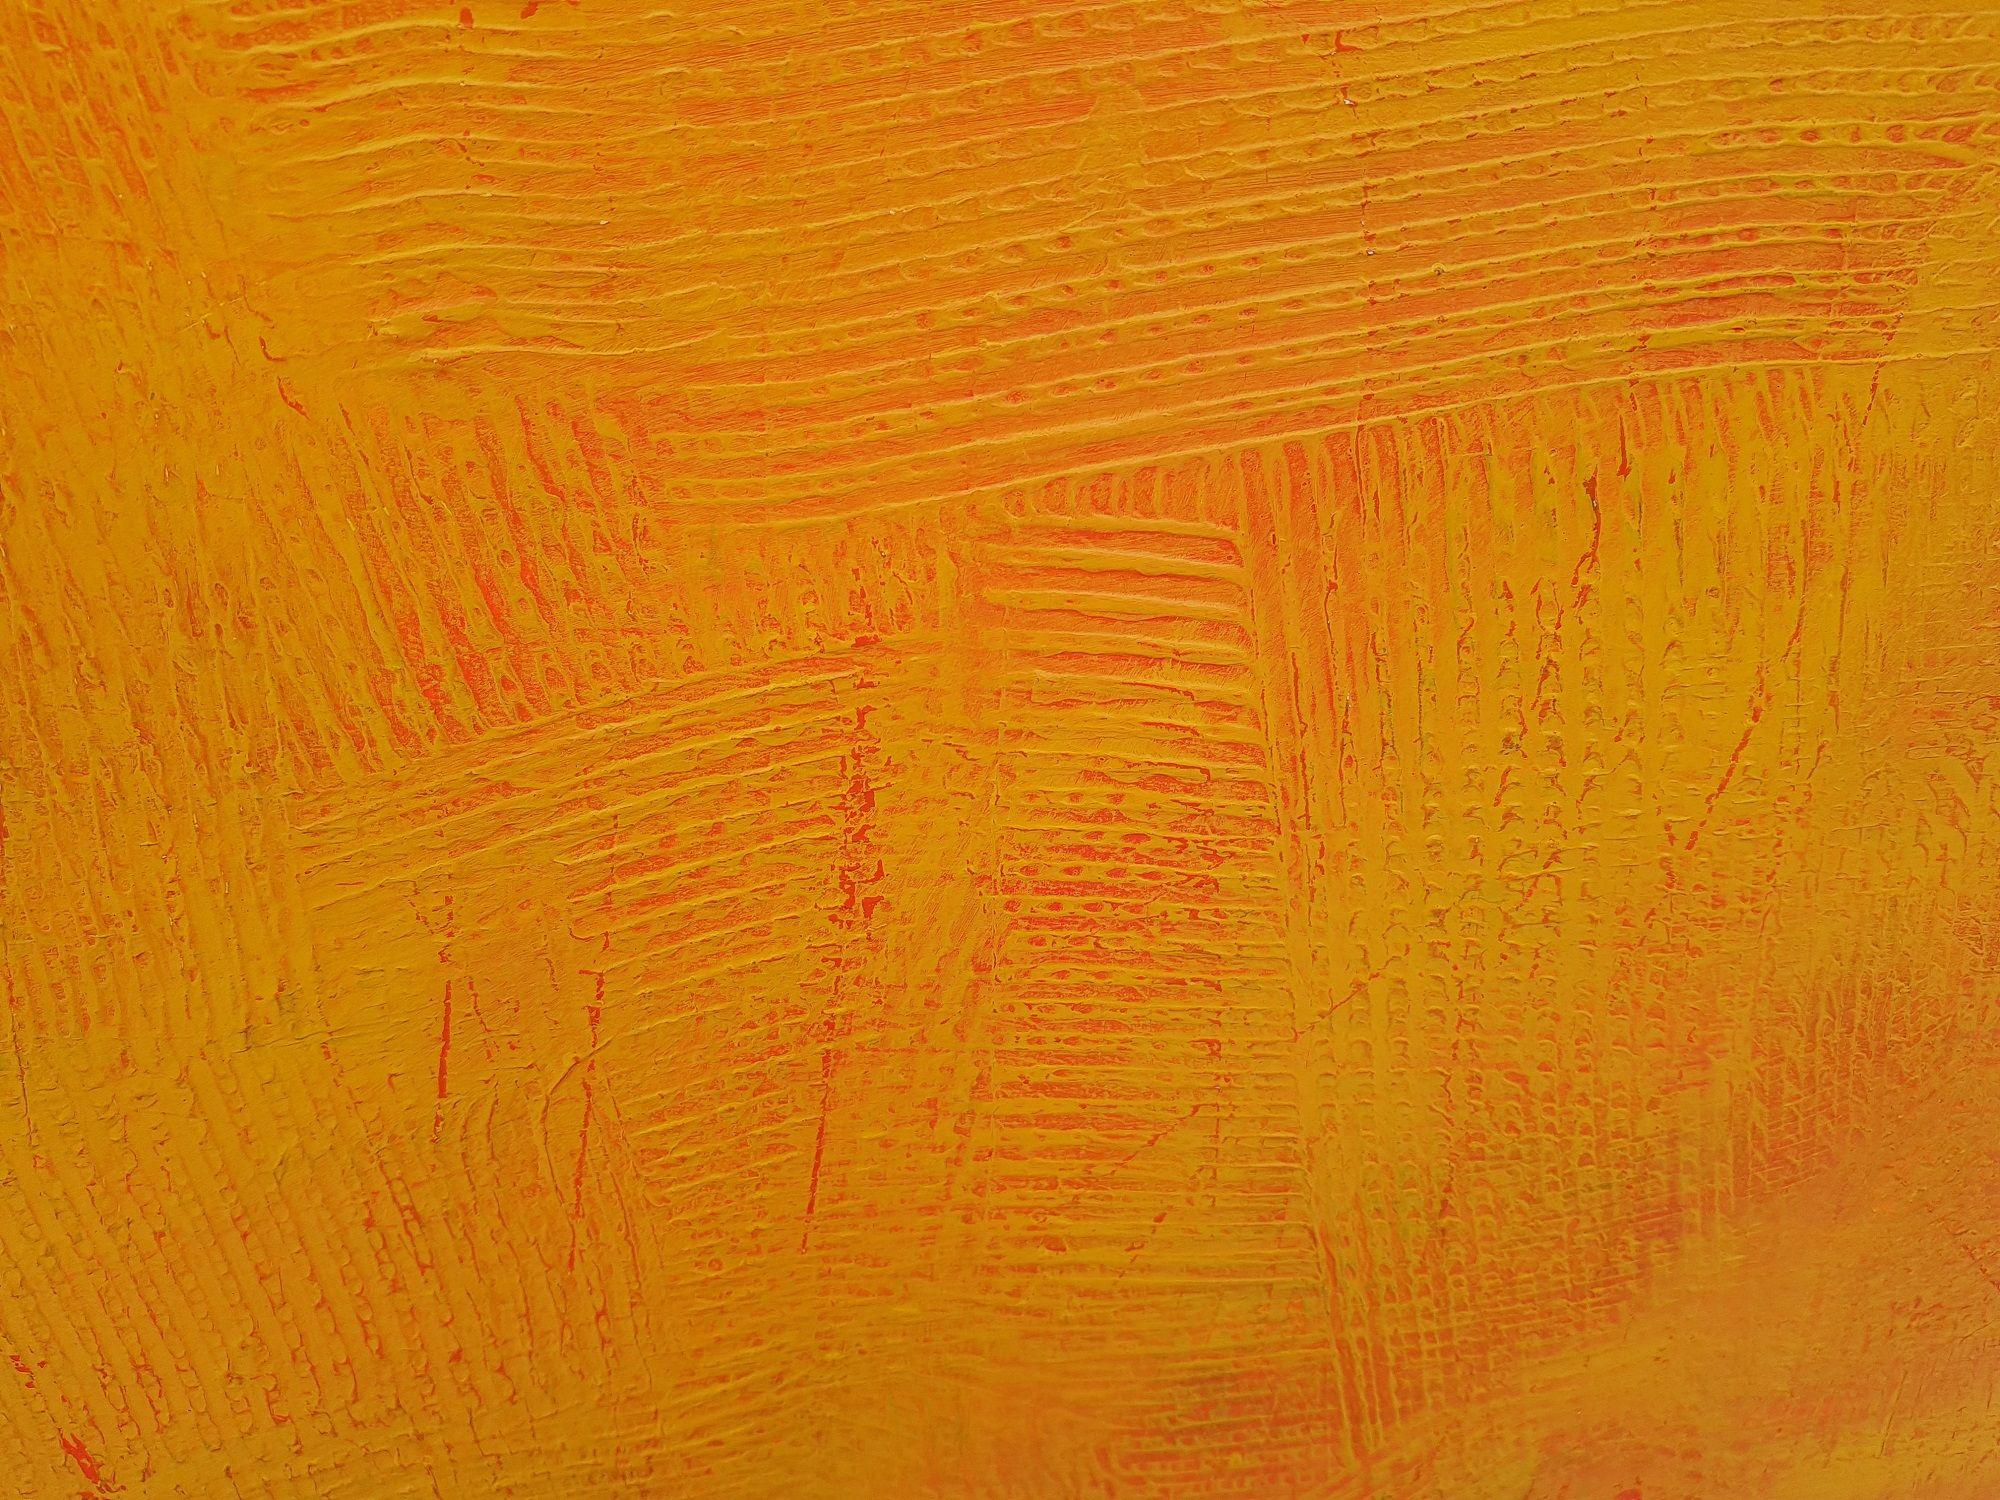 An original one of a kind textured abstract painting.    Minimalistic yet powerful.    Shades of orange. yellow and red will certainly brighten up even the darkest interior.    You can literally feel the warmth and energy from the painting. 